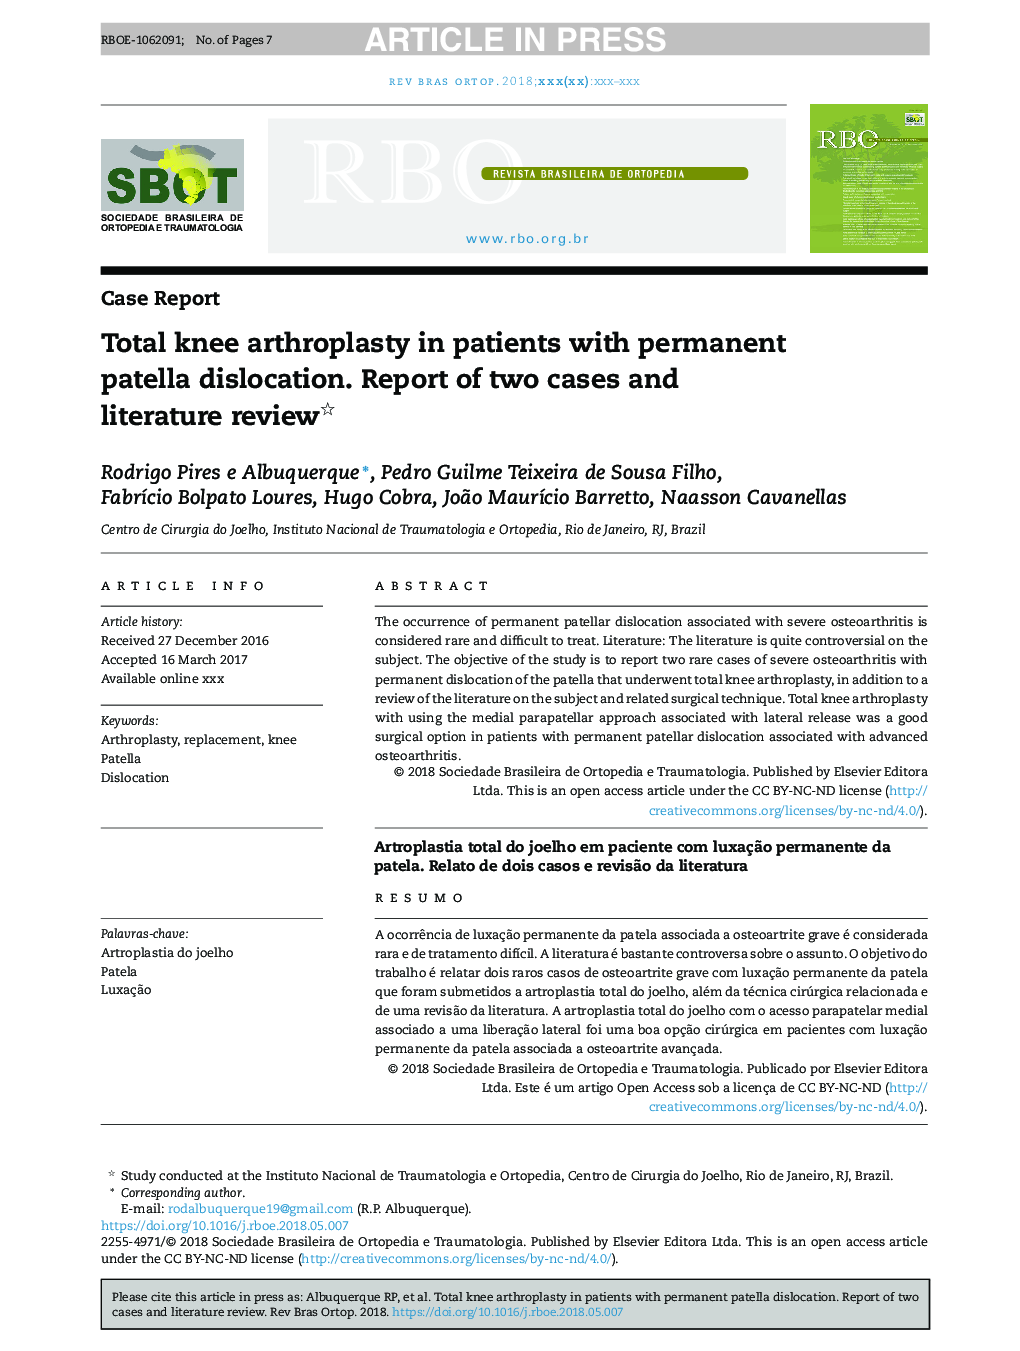 Total knee arthroplasty in patients with permanent patella dislocation. Report of two cases and literature review